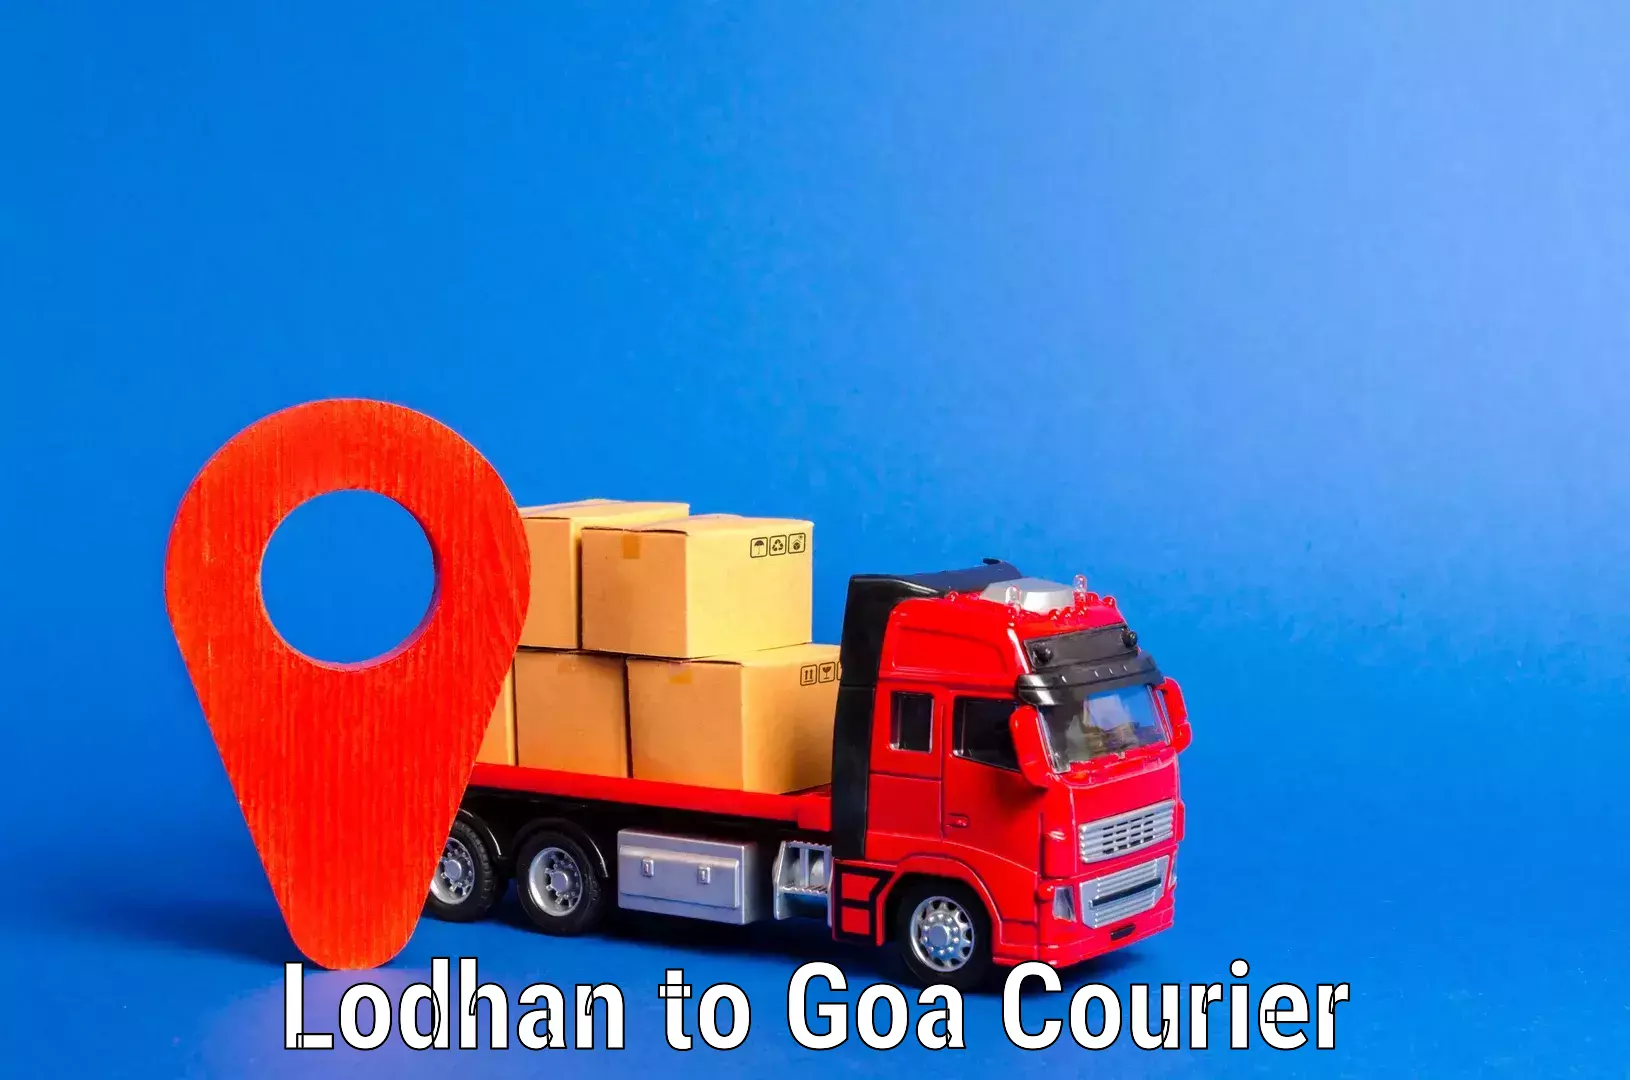 Residential moving experts Lodhan to Goa